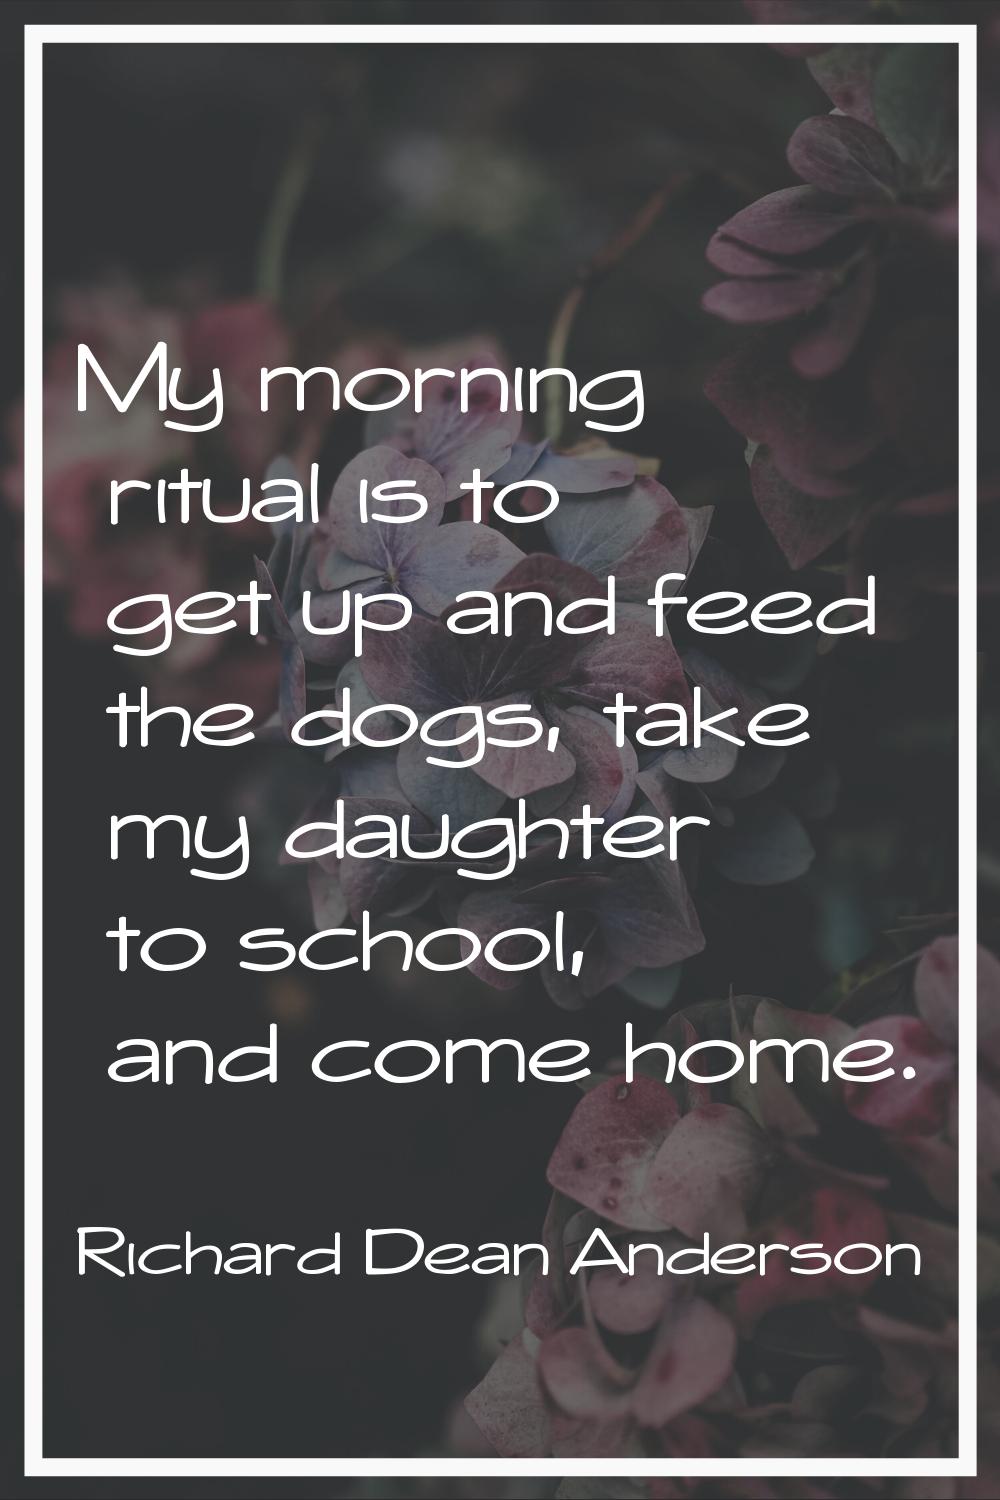 My morning ritual is to get up and feed the dogs, take my daughter to school, and come home.